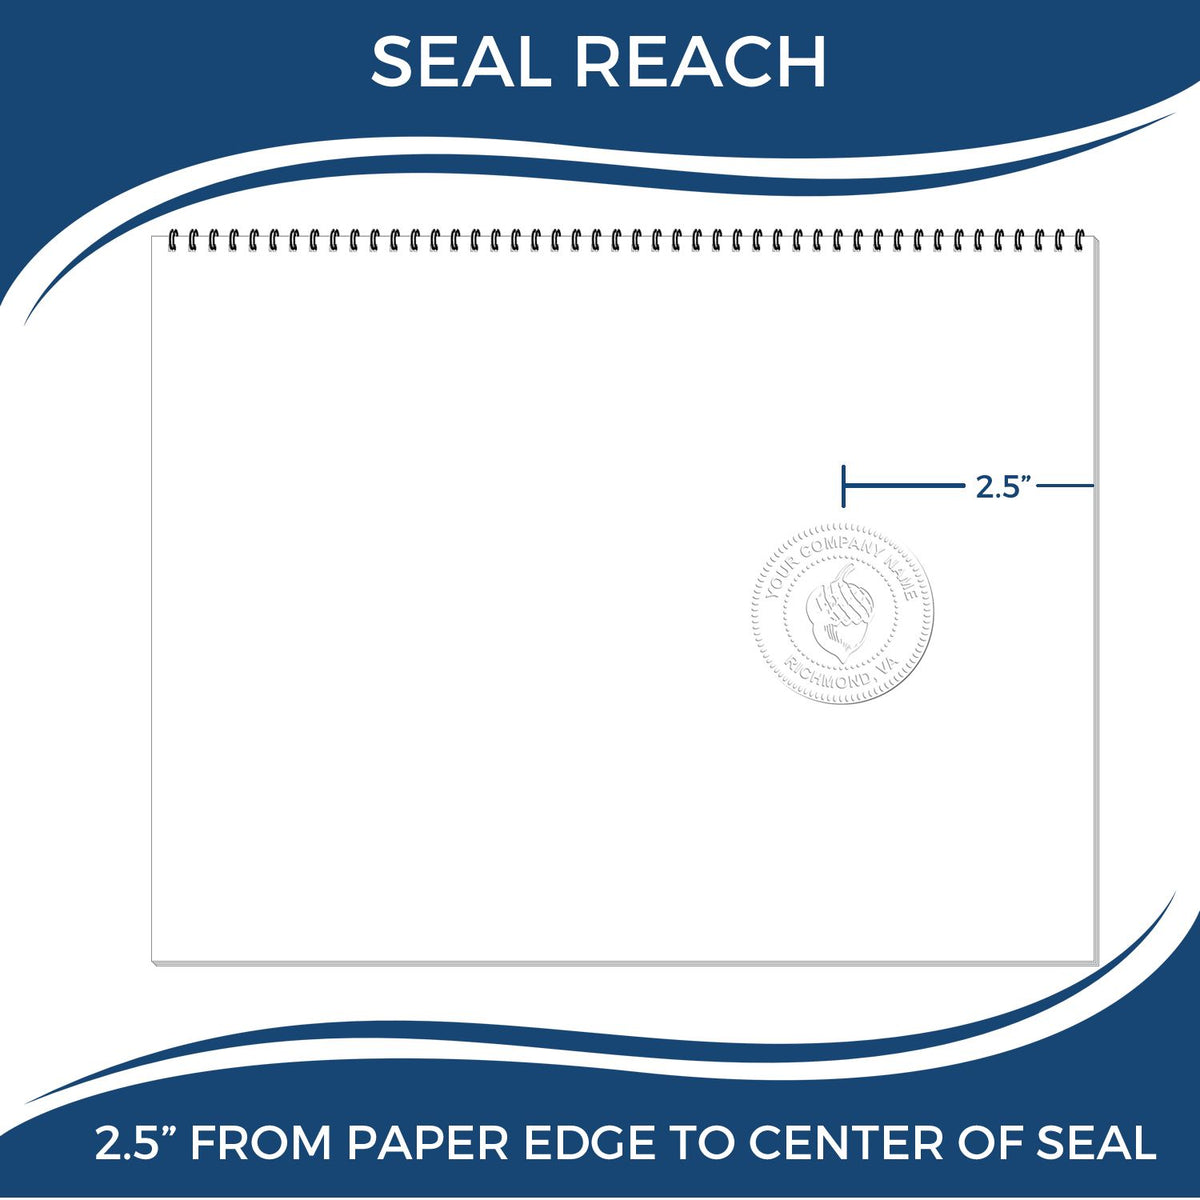 An infographic showing the seal reach which is represented by a ruler and a miniature seal image of the Long Reach Nebraska PE Seal